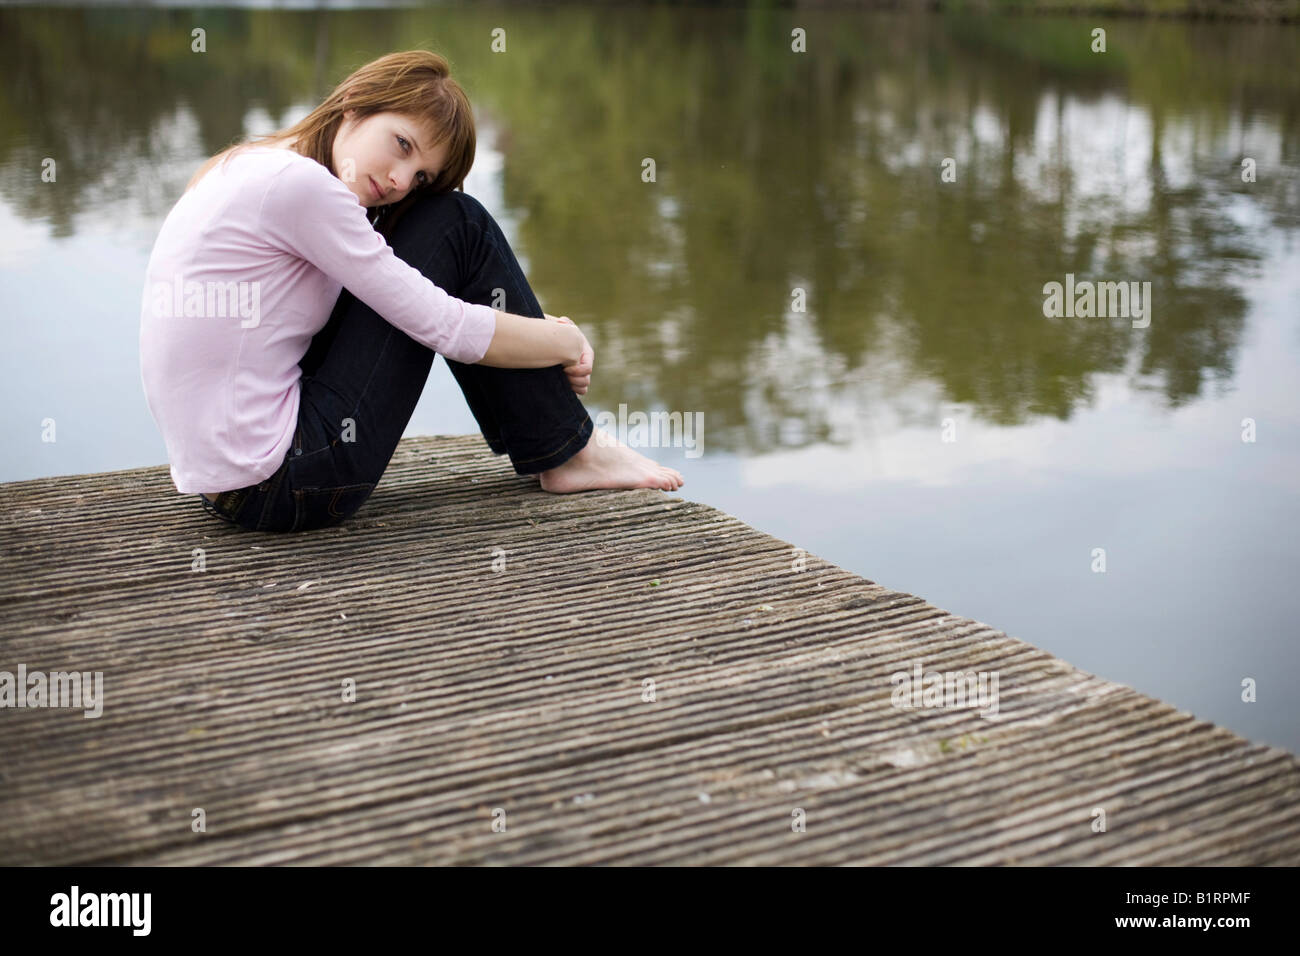 Young woman sitting on a jetty, wooden dock, looking pensive Stock Photo